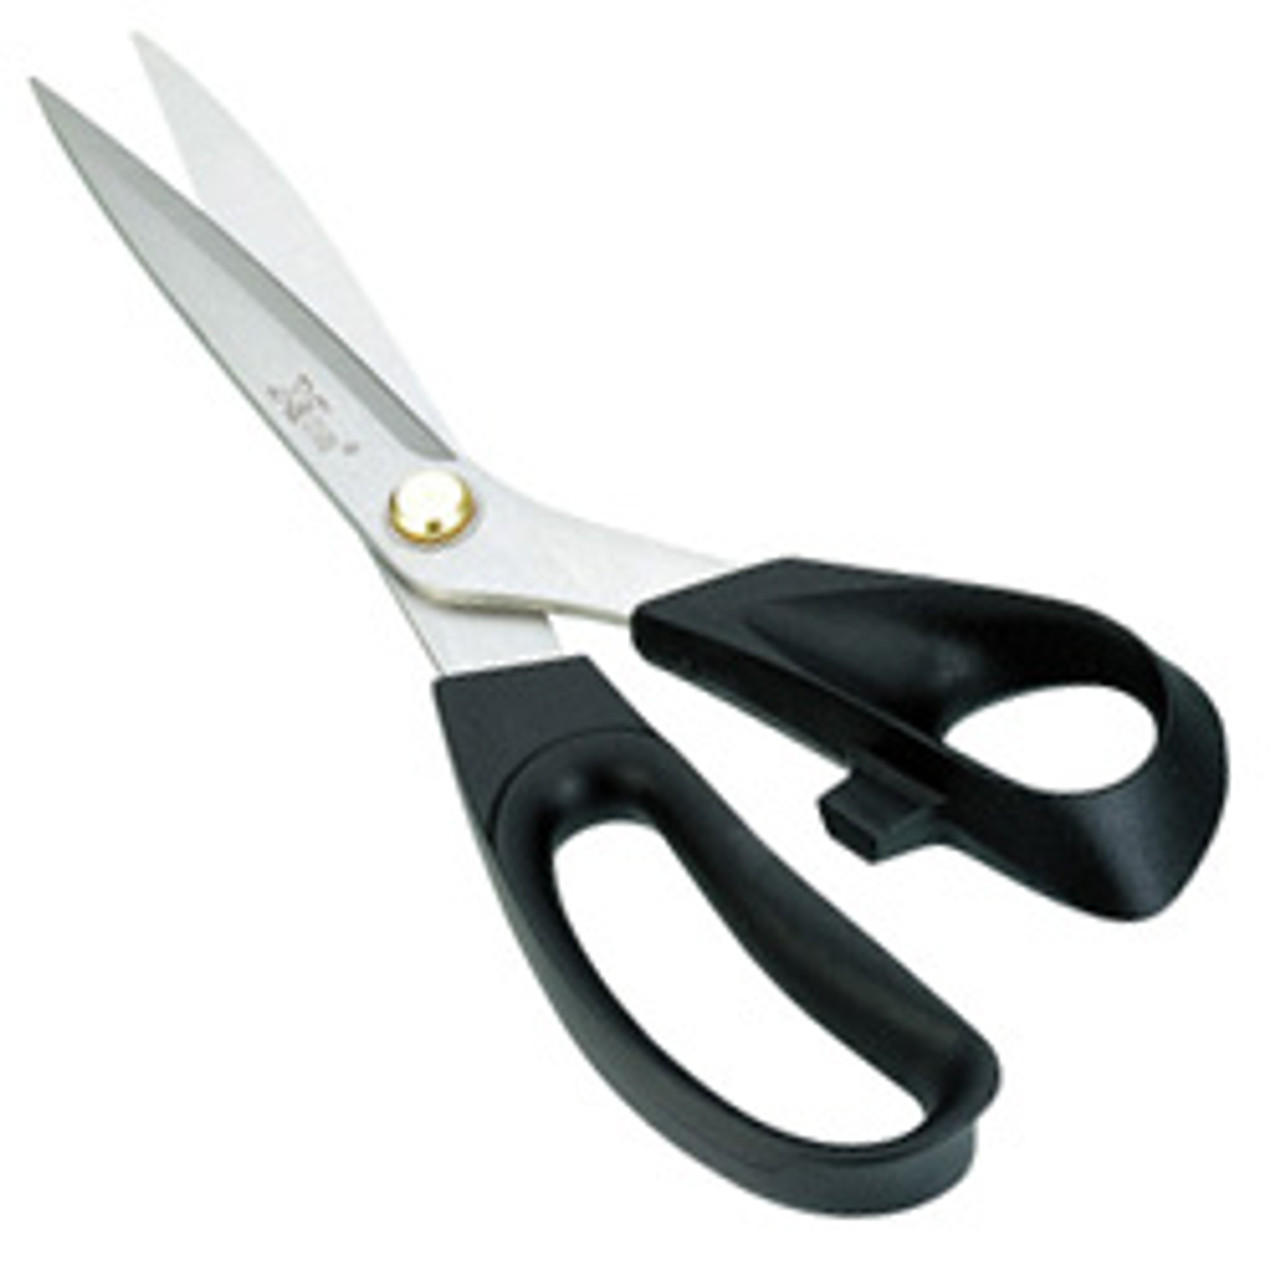 Sewing Scissors  Sewing Shears - Kmart